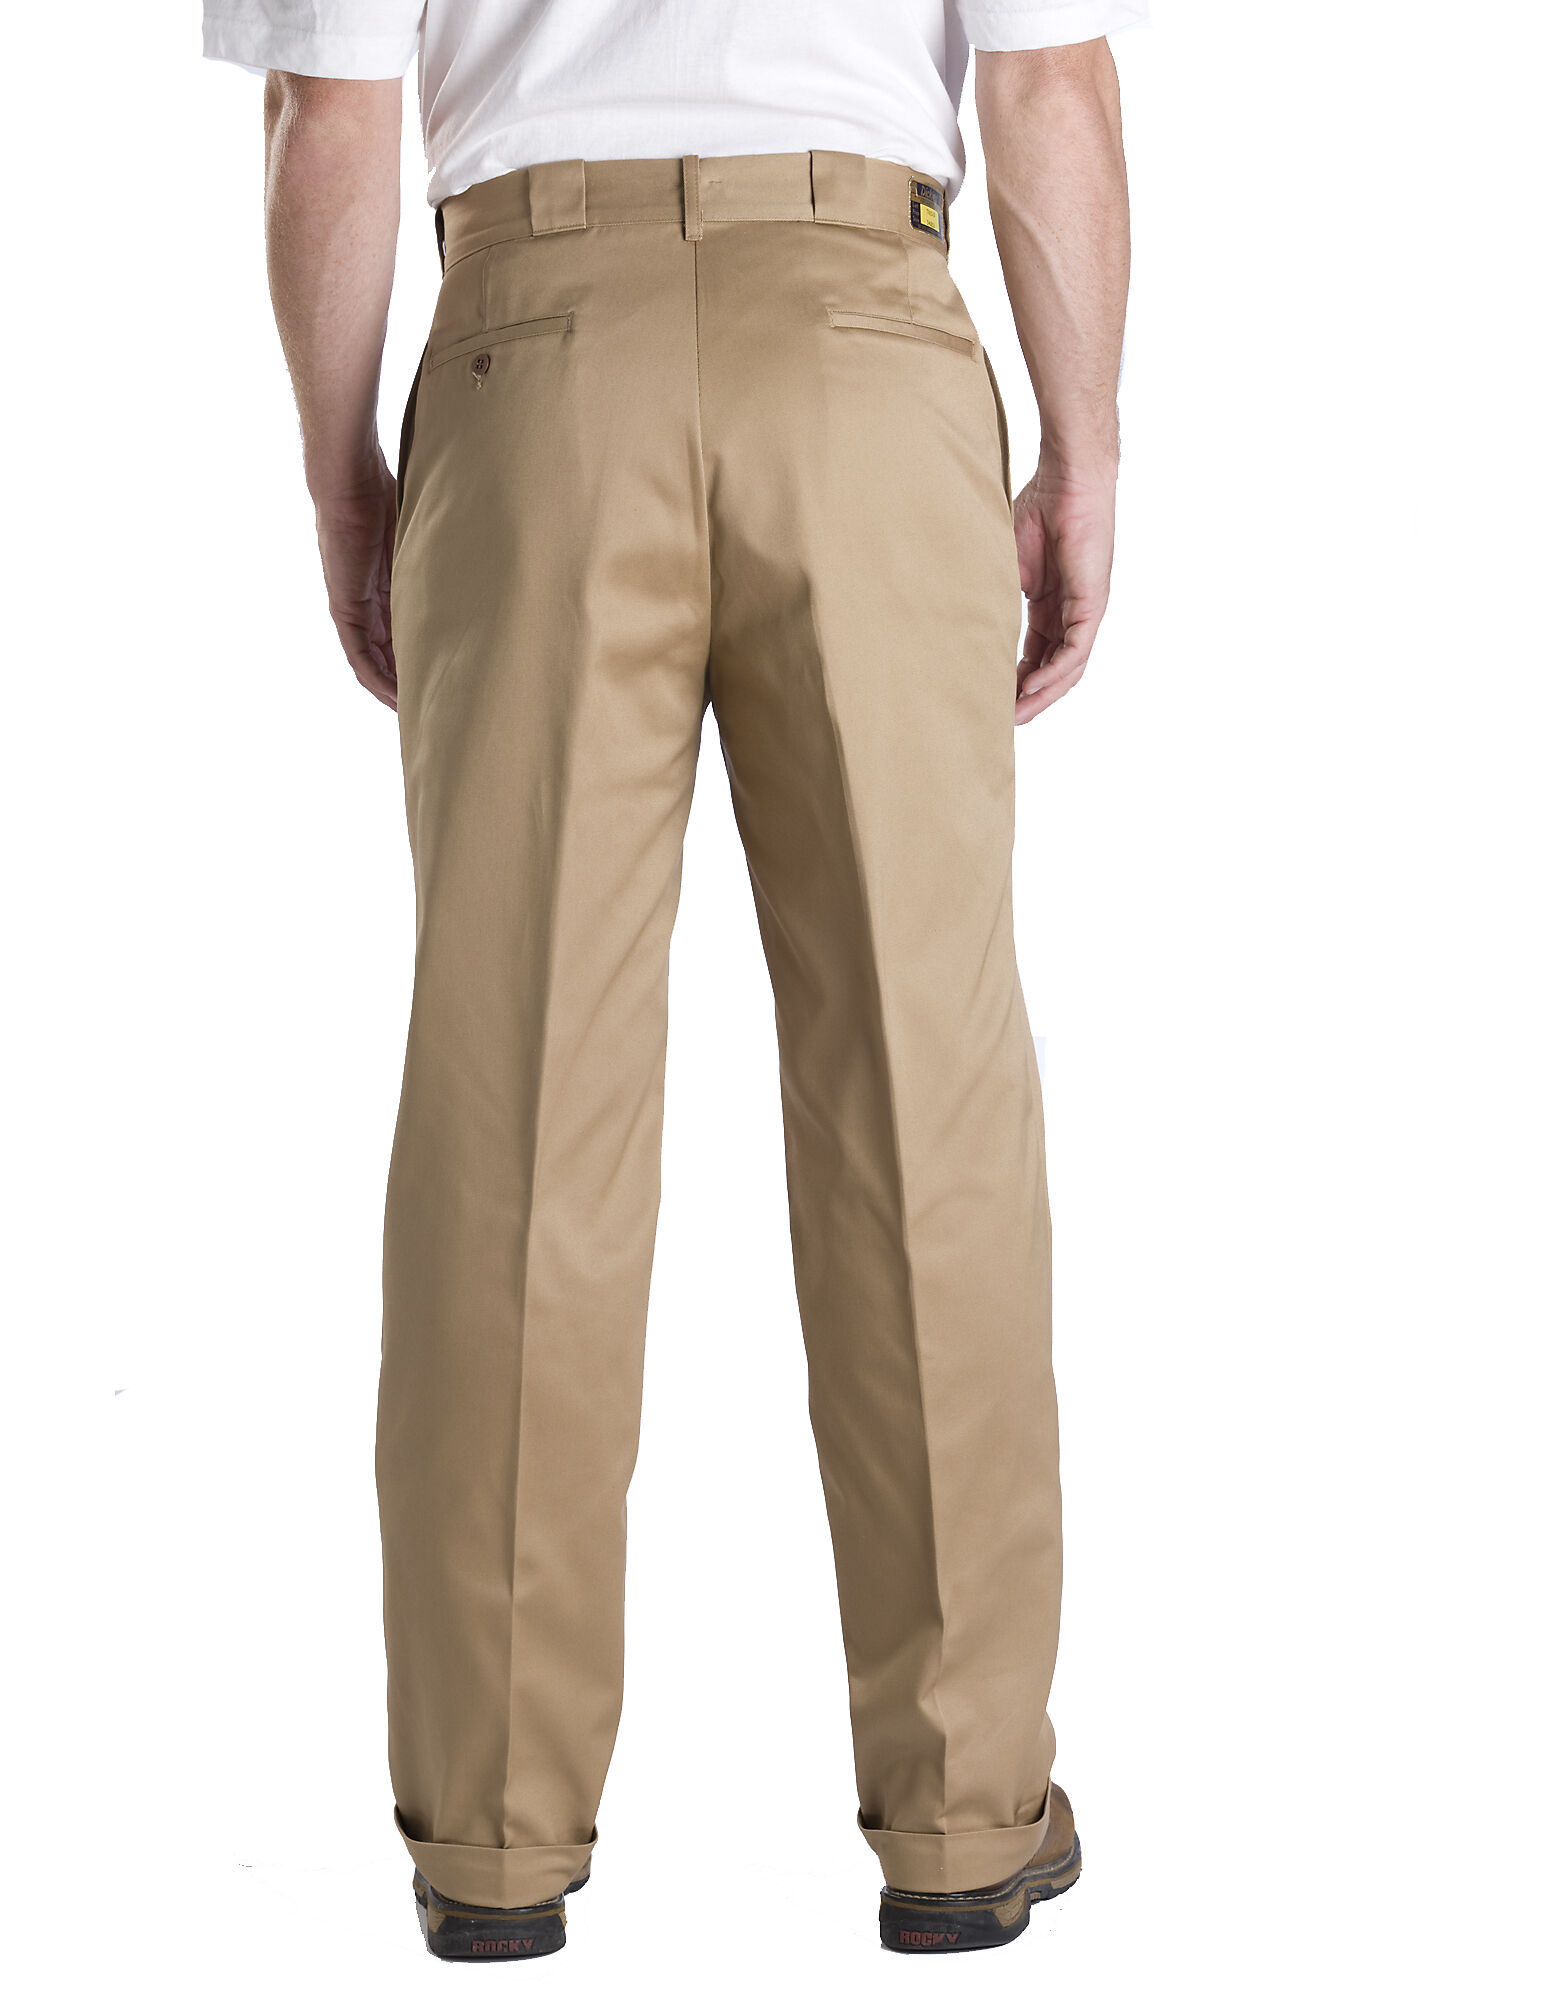 Cuffed Pants For Men | Traditional Rise | Dickies